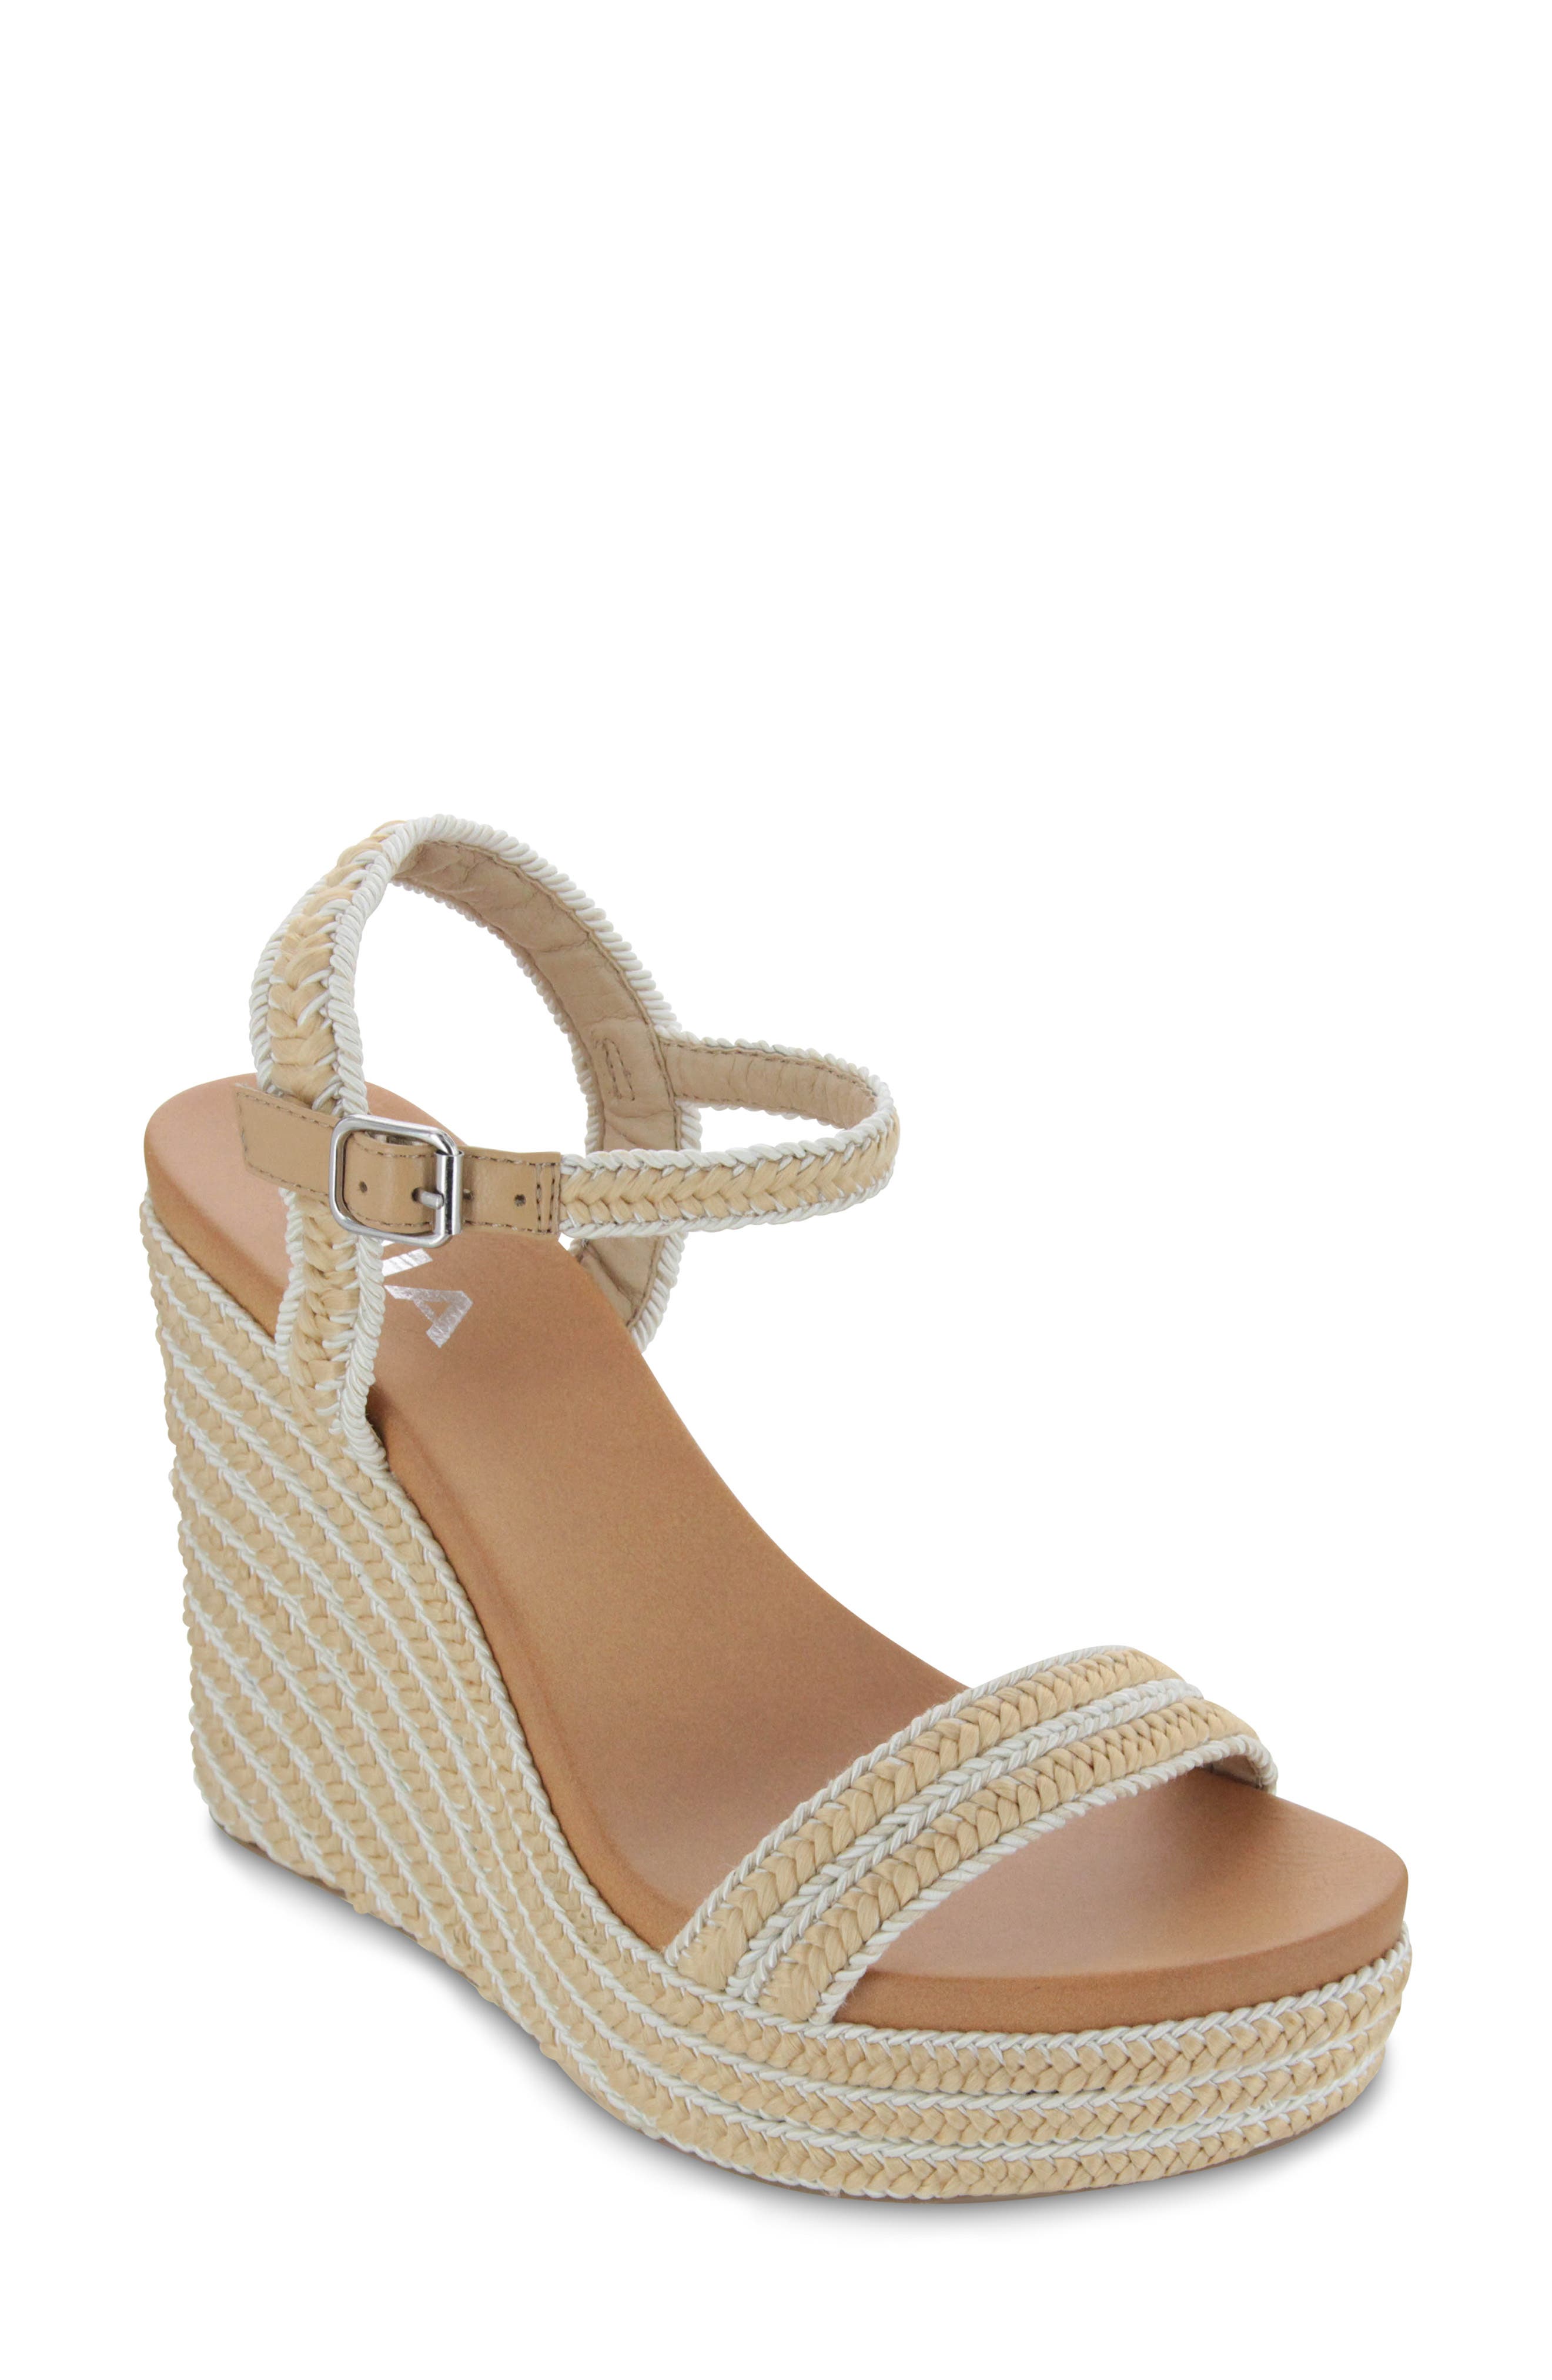 Shoes Sandals Espadrille Sandals Australia Luxe Collective Espadrille Sandals natural white casual look 